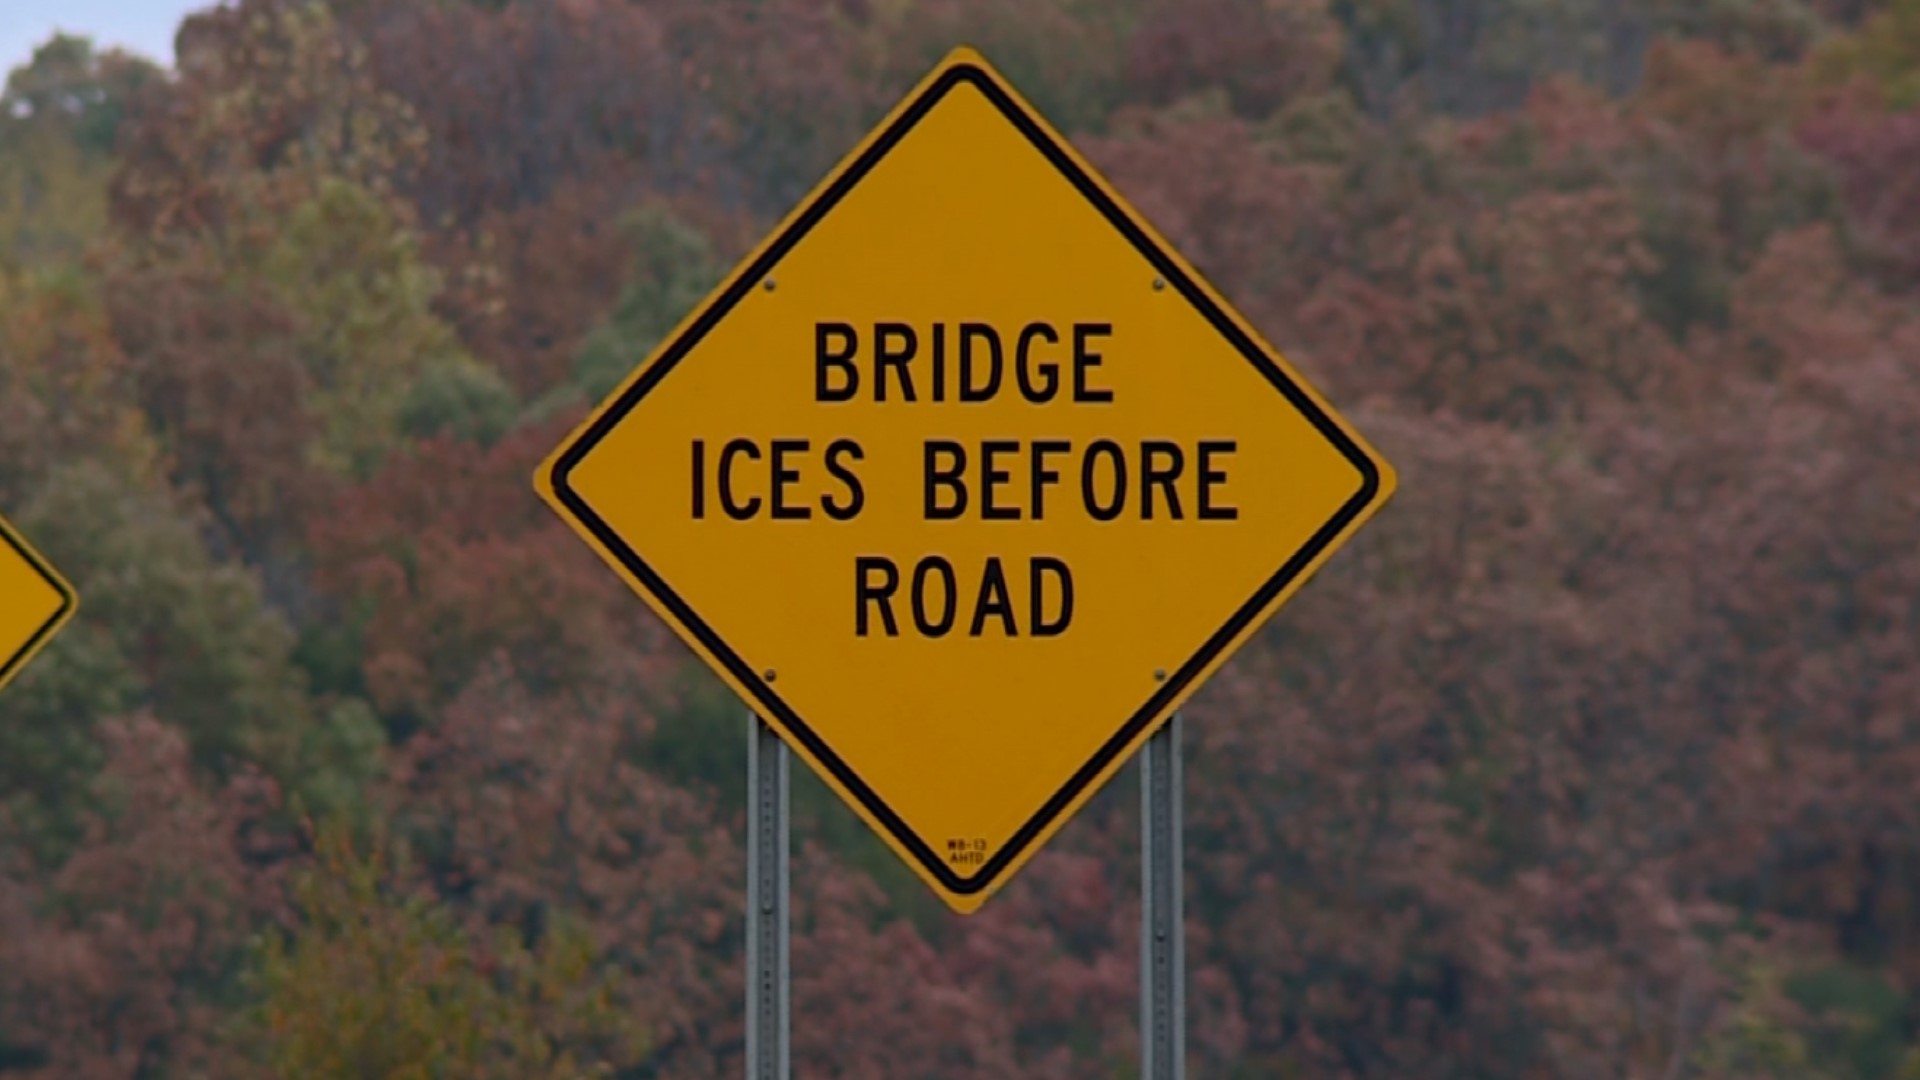 Experts explain why bridges ice before roads and what you should do in these cases.